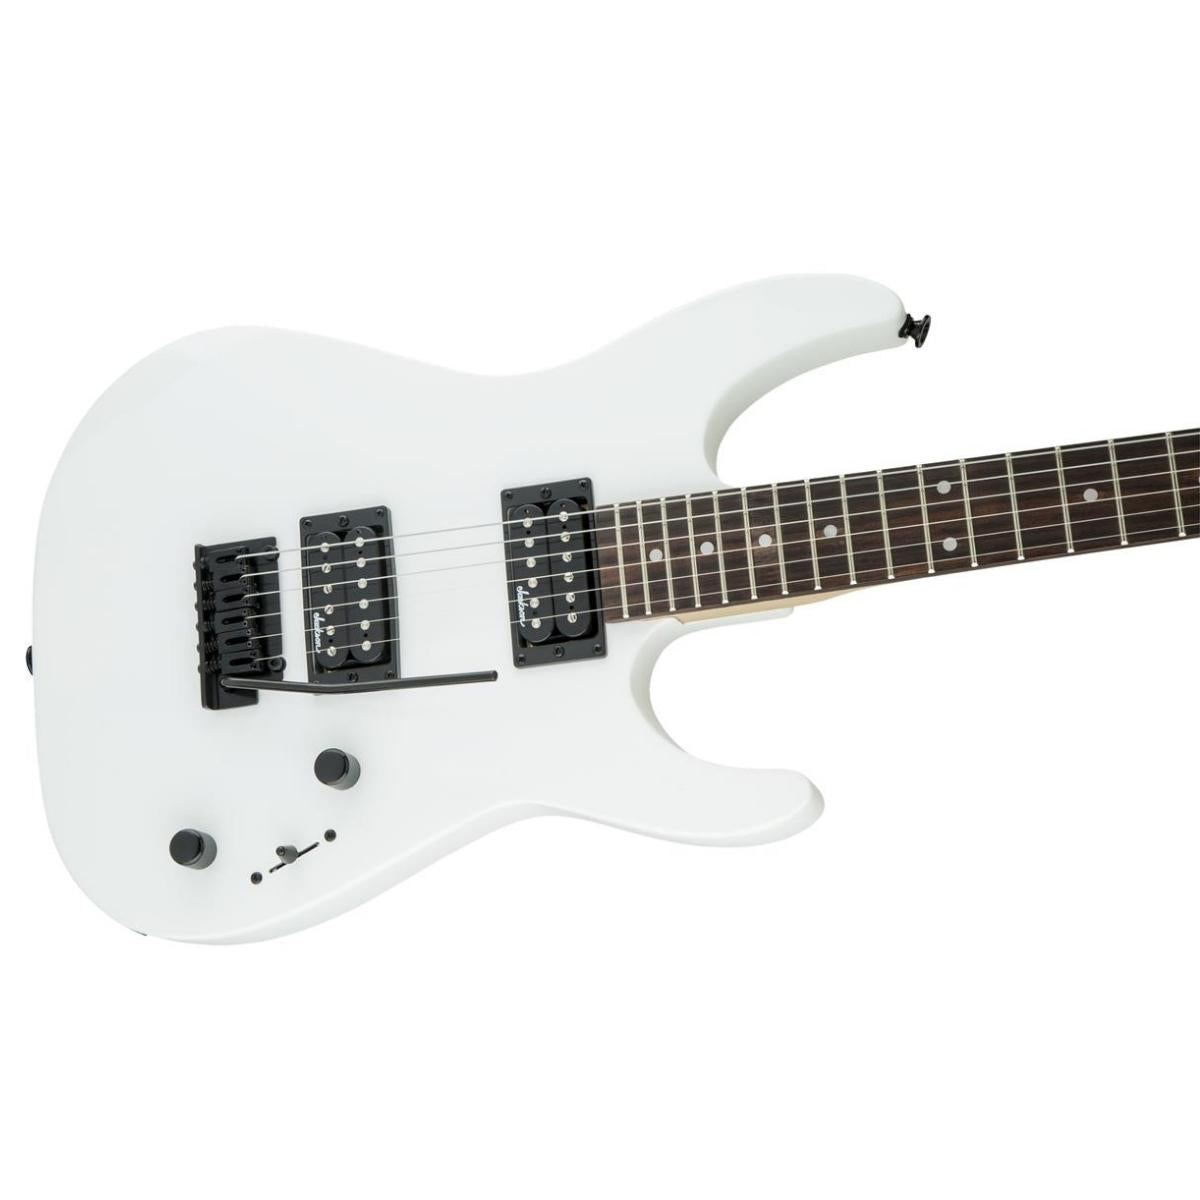 Jackson JS11 JS Series 6-String 22 Frets Dinky Electric Guitar HH with Humbucking Pickups, Amaranth Fingerboard, Volume & Tone Control (Snow White)